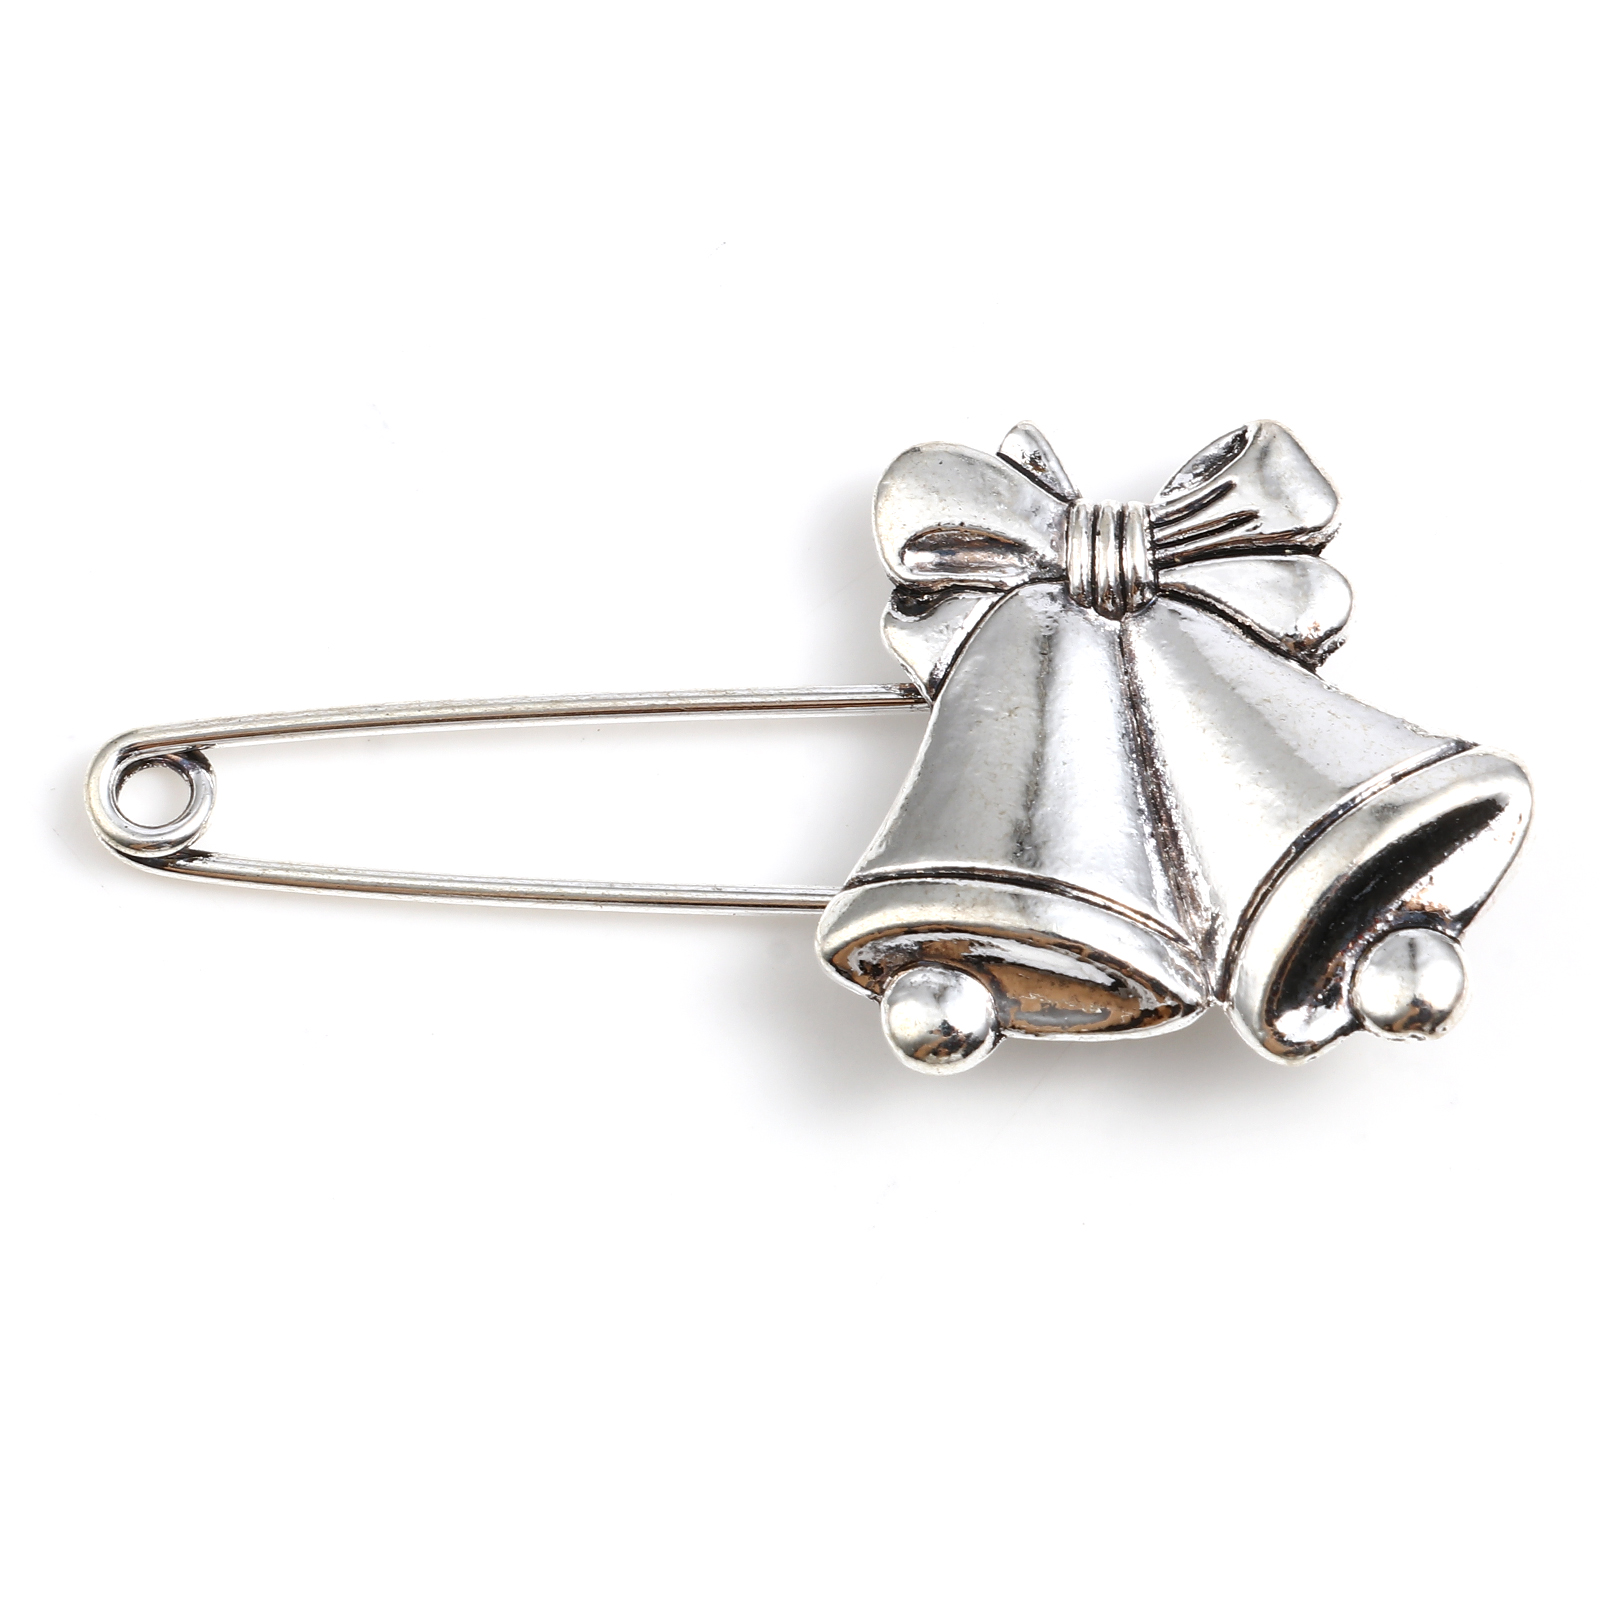 Picture of Zinc Based Alloy Pin Brooches Findings Christmas Jingle Bell Antique Silver Color 6cm x 2.8cm, 2 PCs